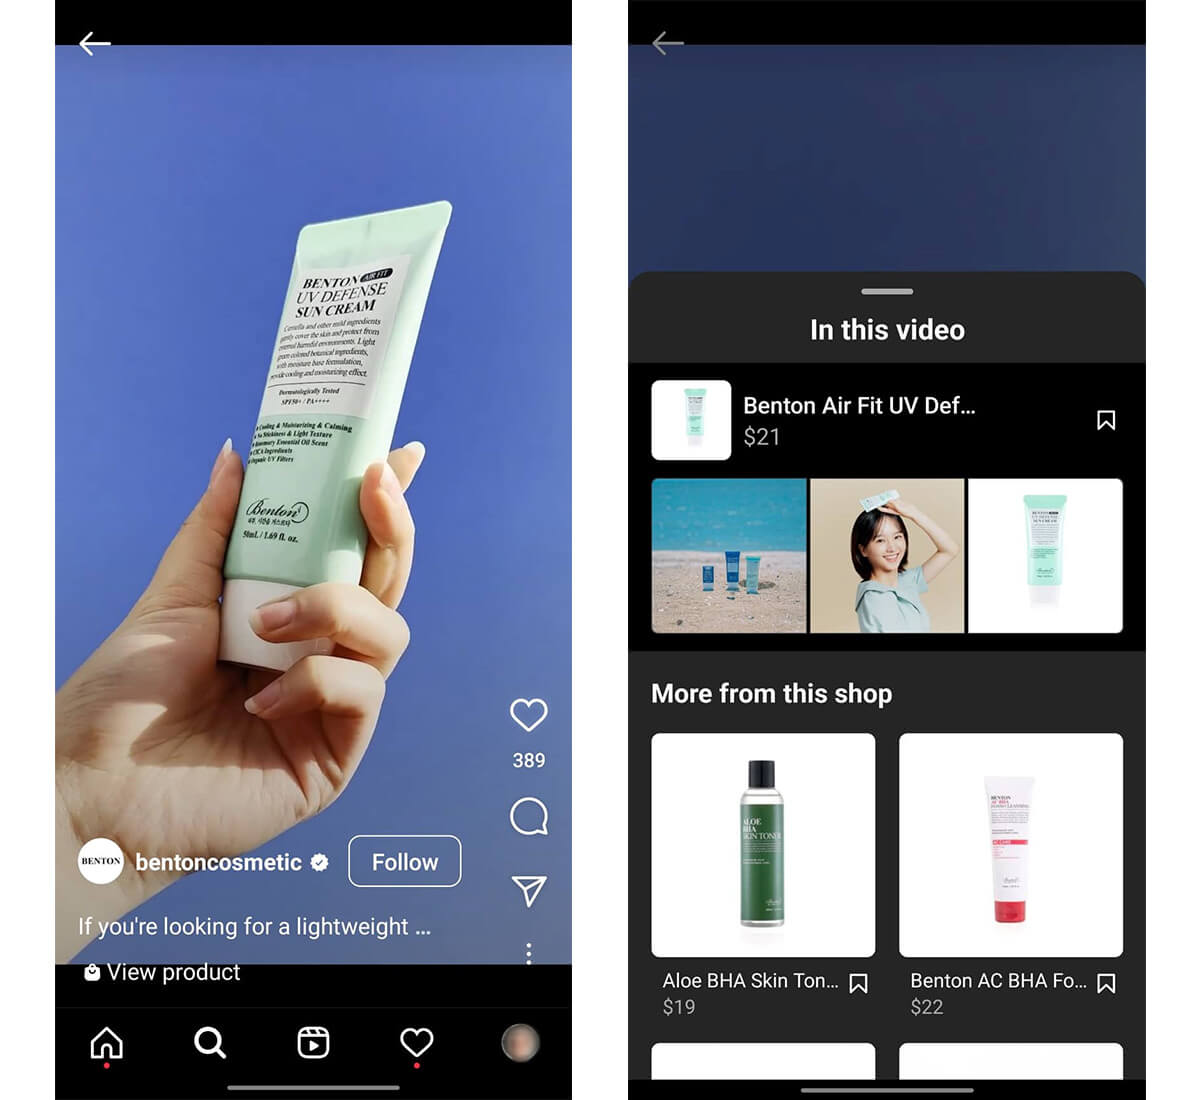 How Benton cosmetic use shoppable videos on the Instagram